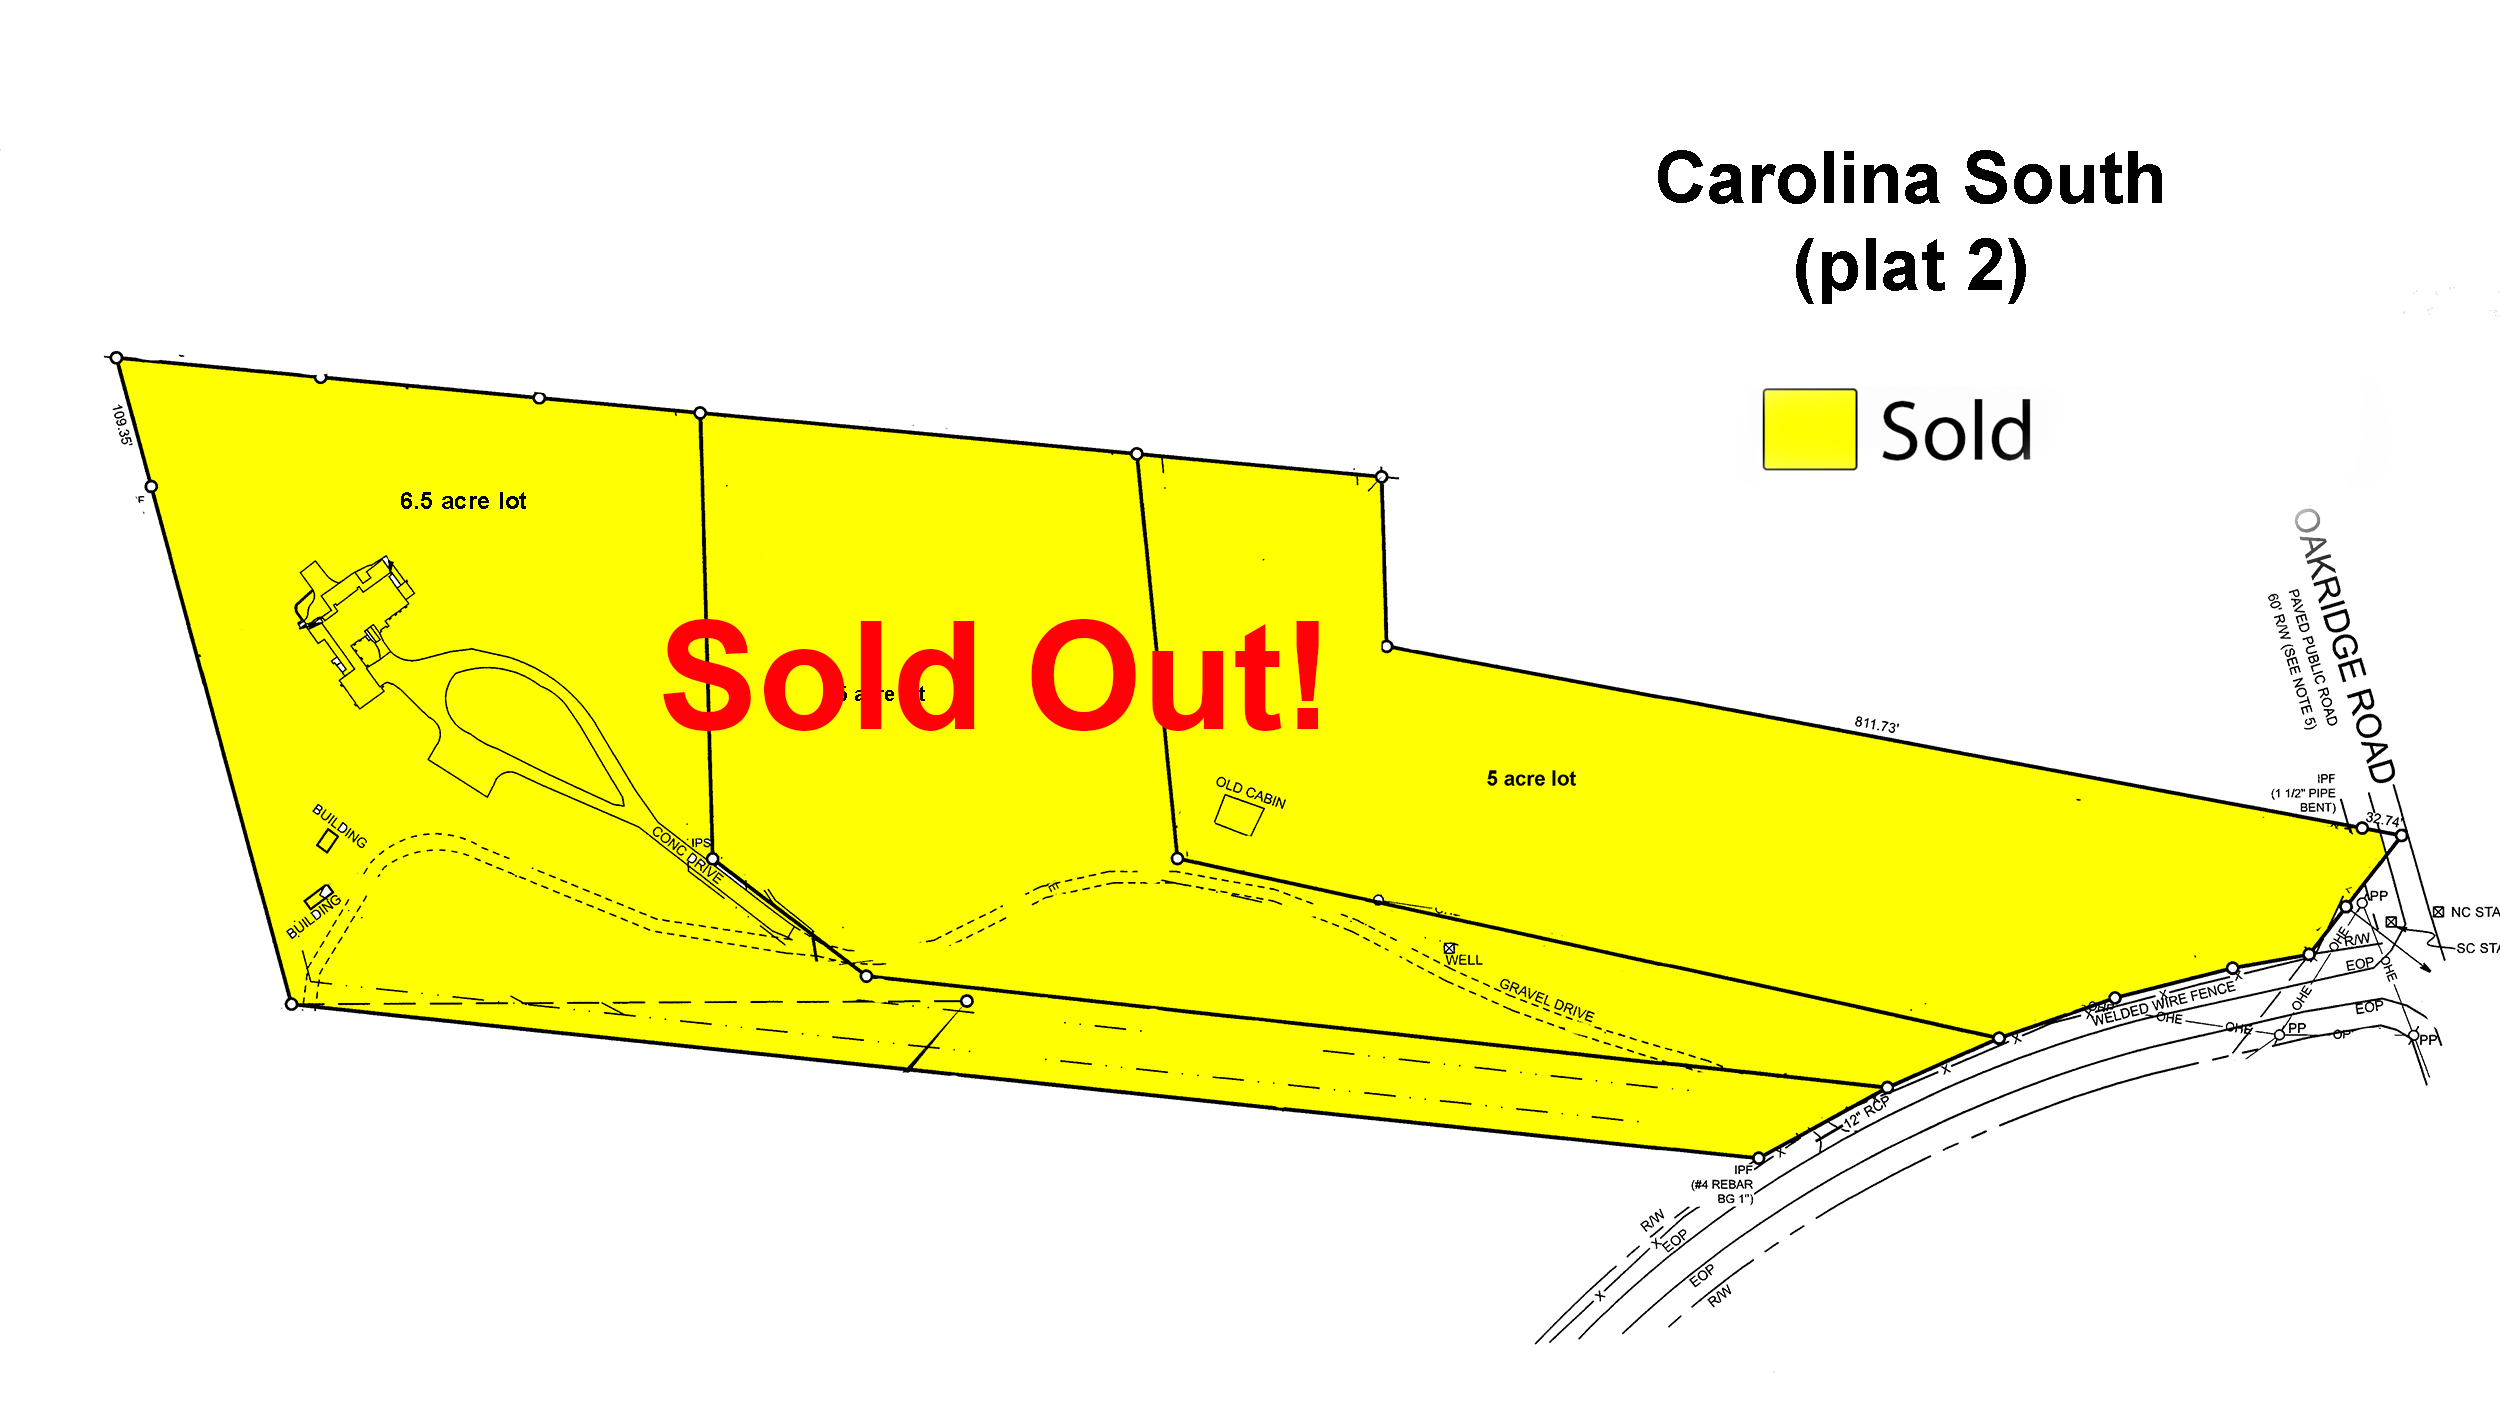 Carolina South Recorded Plat 2 sold out